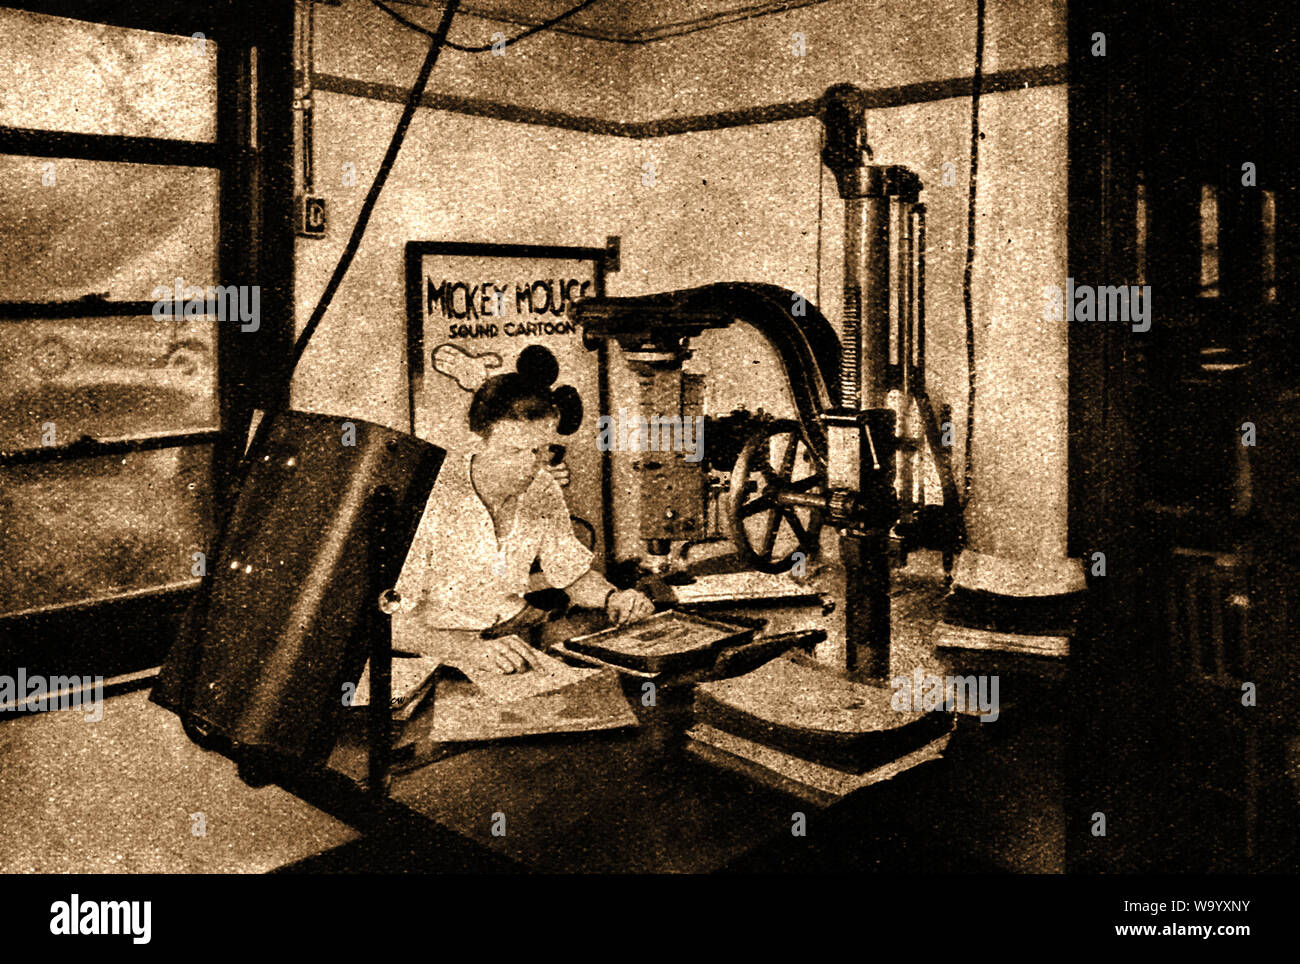 An early photograph of the Disney film Studios where a technician is using cel animation making a sound cartoon film of Mickey Mouse using the old method of individual frames Stock Photo